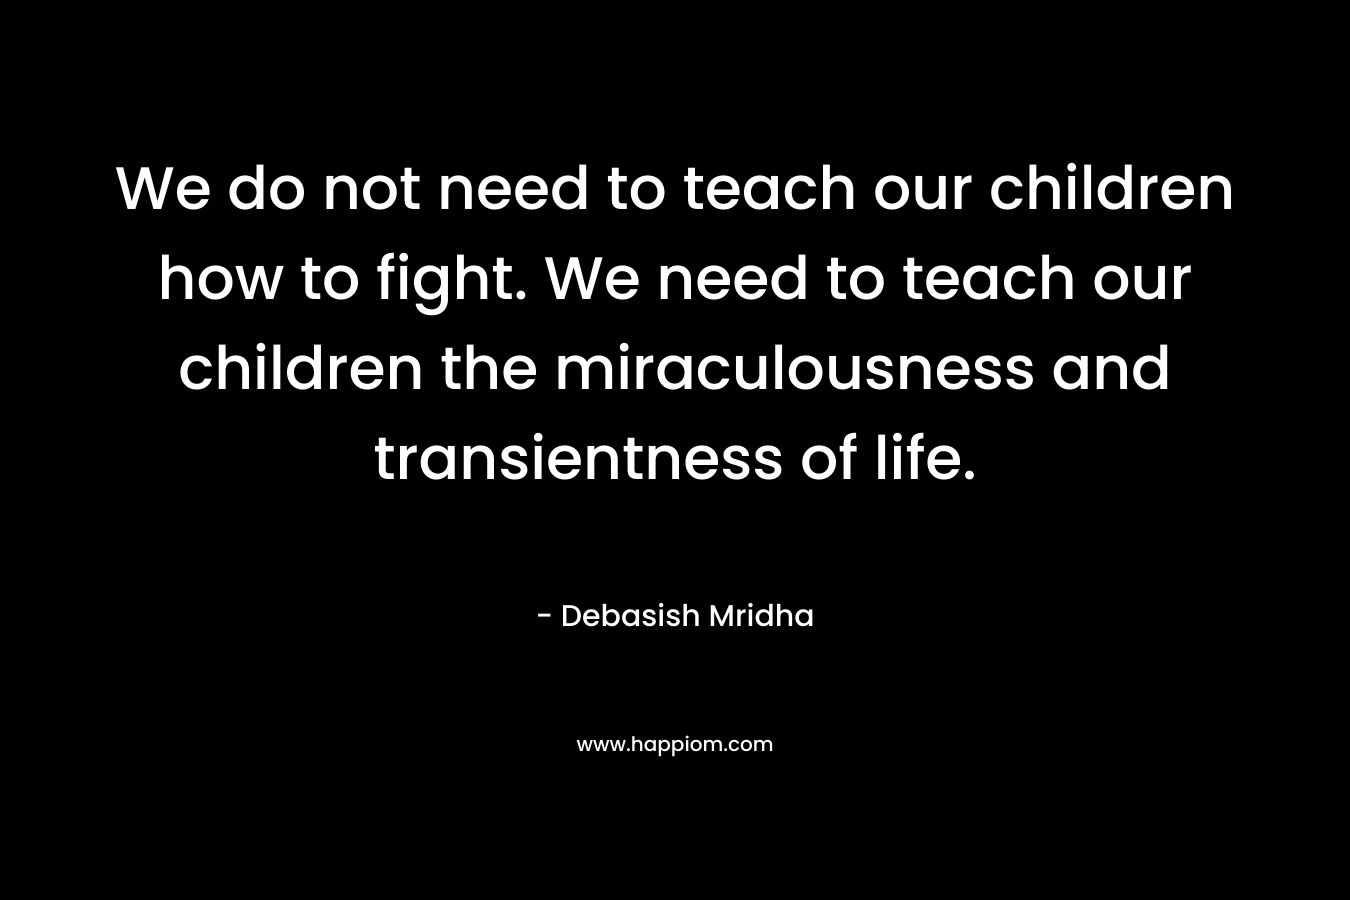 We do not need to teach our children how to fight. We need to teach our children the miraculousness and transientness of life.